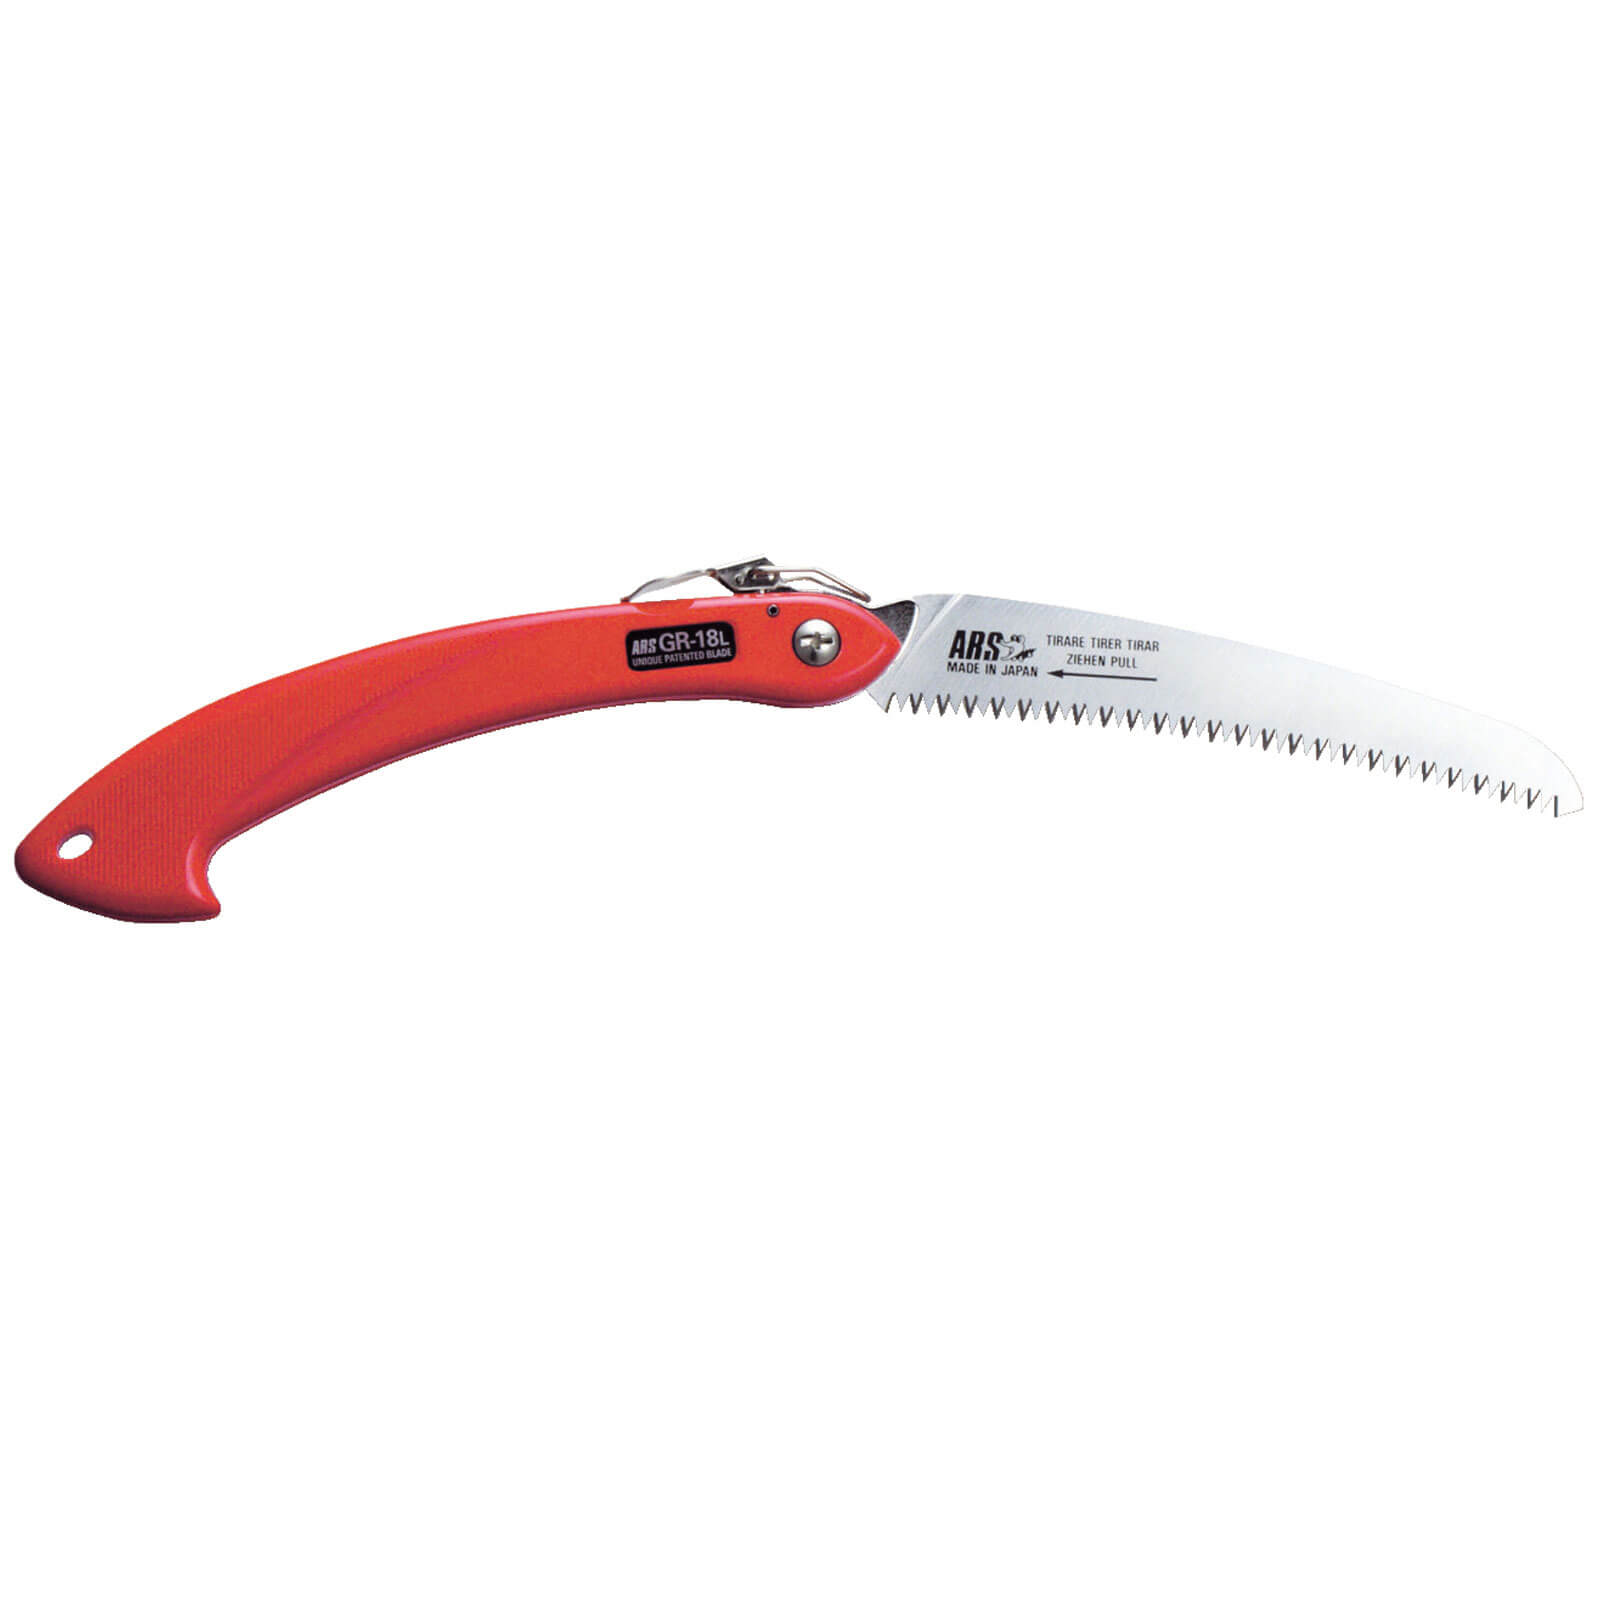 Image of ARS GR-18L Folding Pruning Saw 180mm